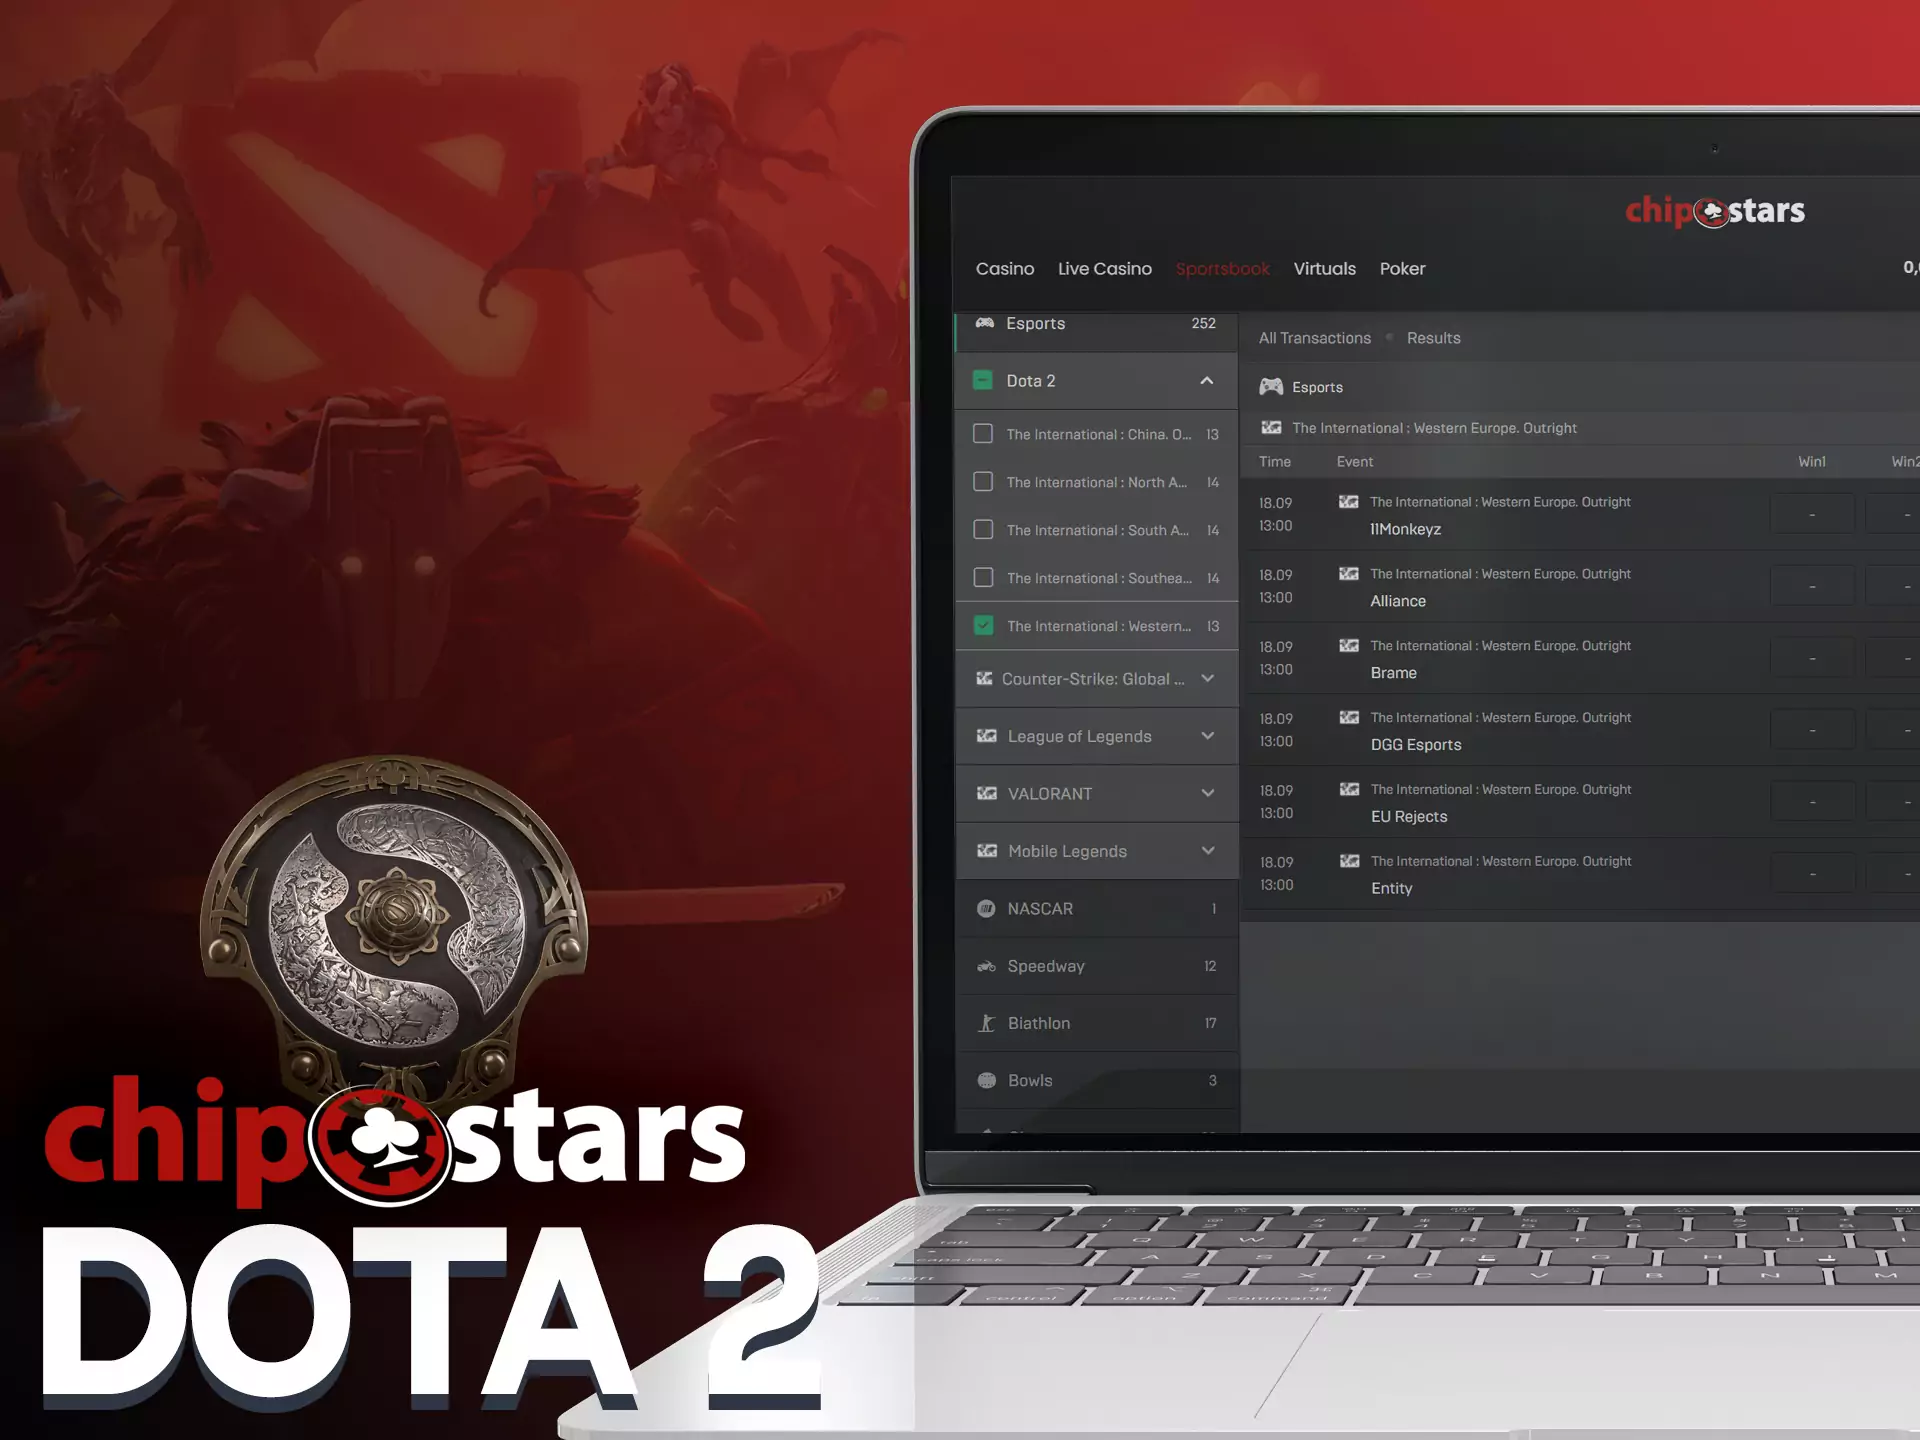 On the Chipstars site, you can place bets on Dota 2 matches online.